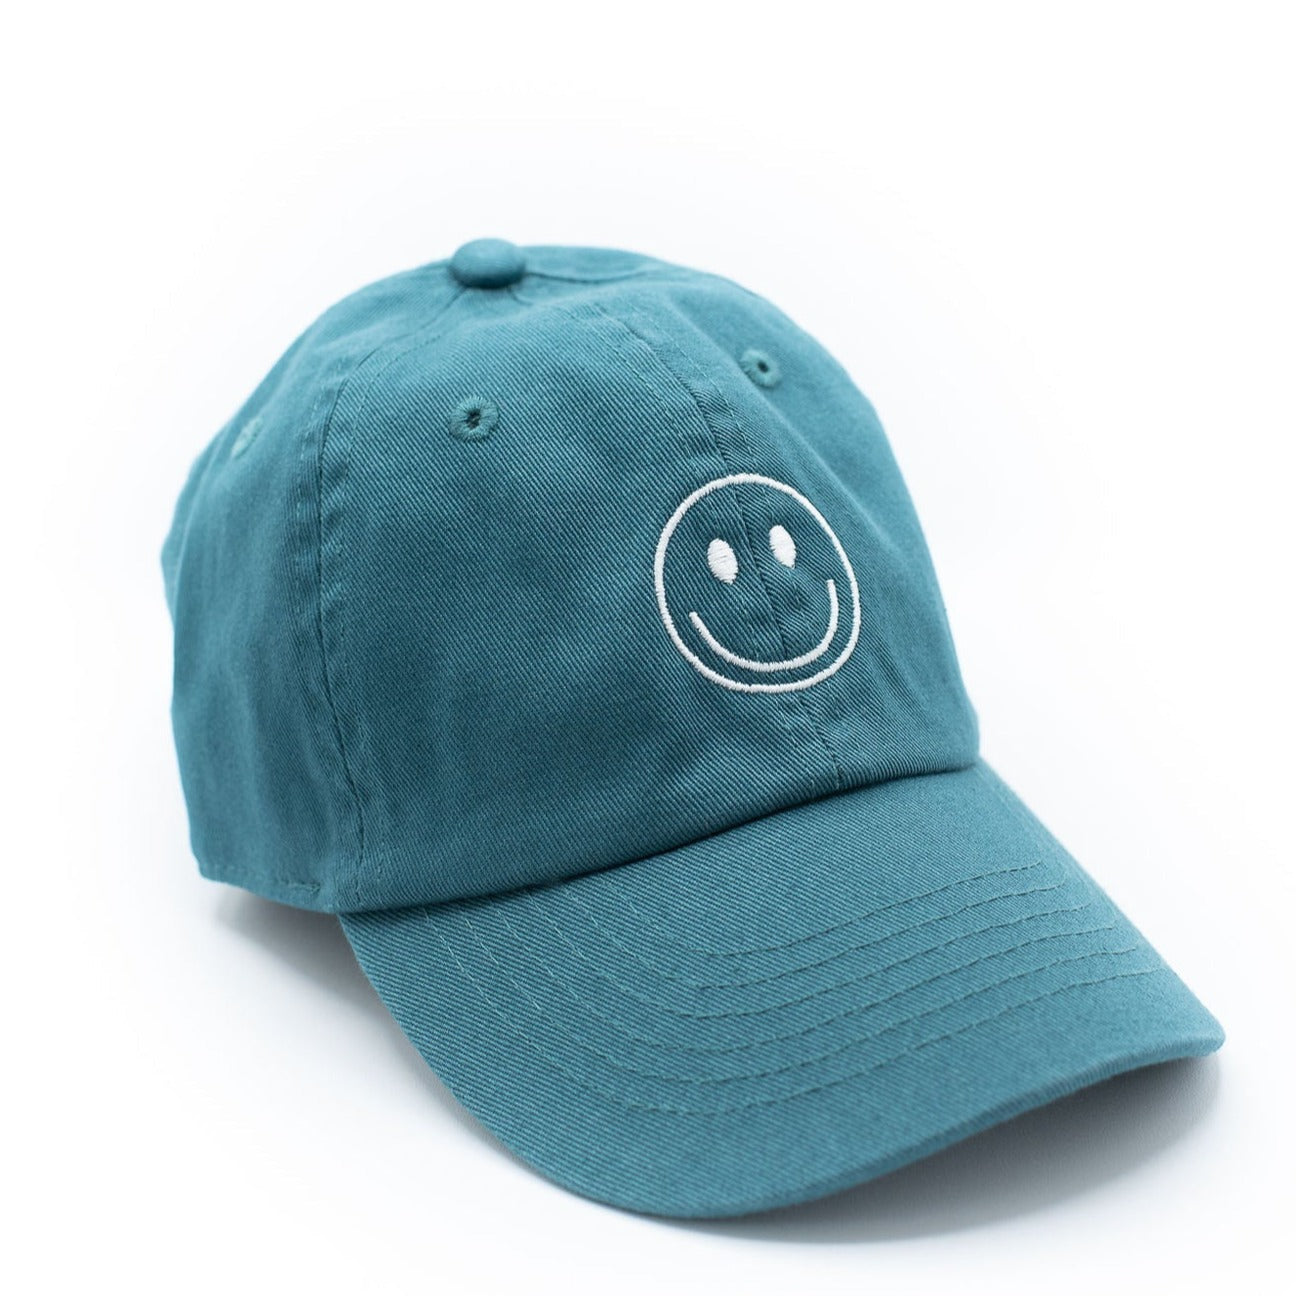 smiley face hat in teal